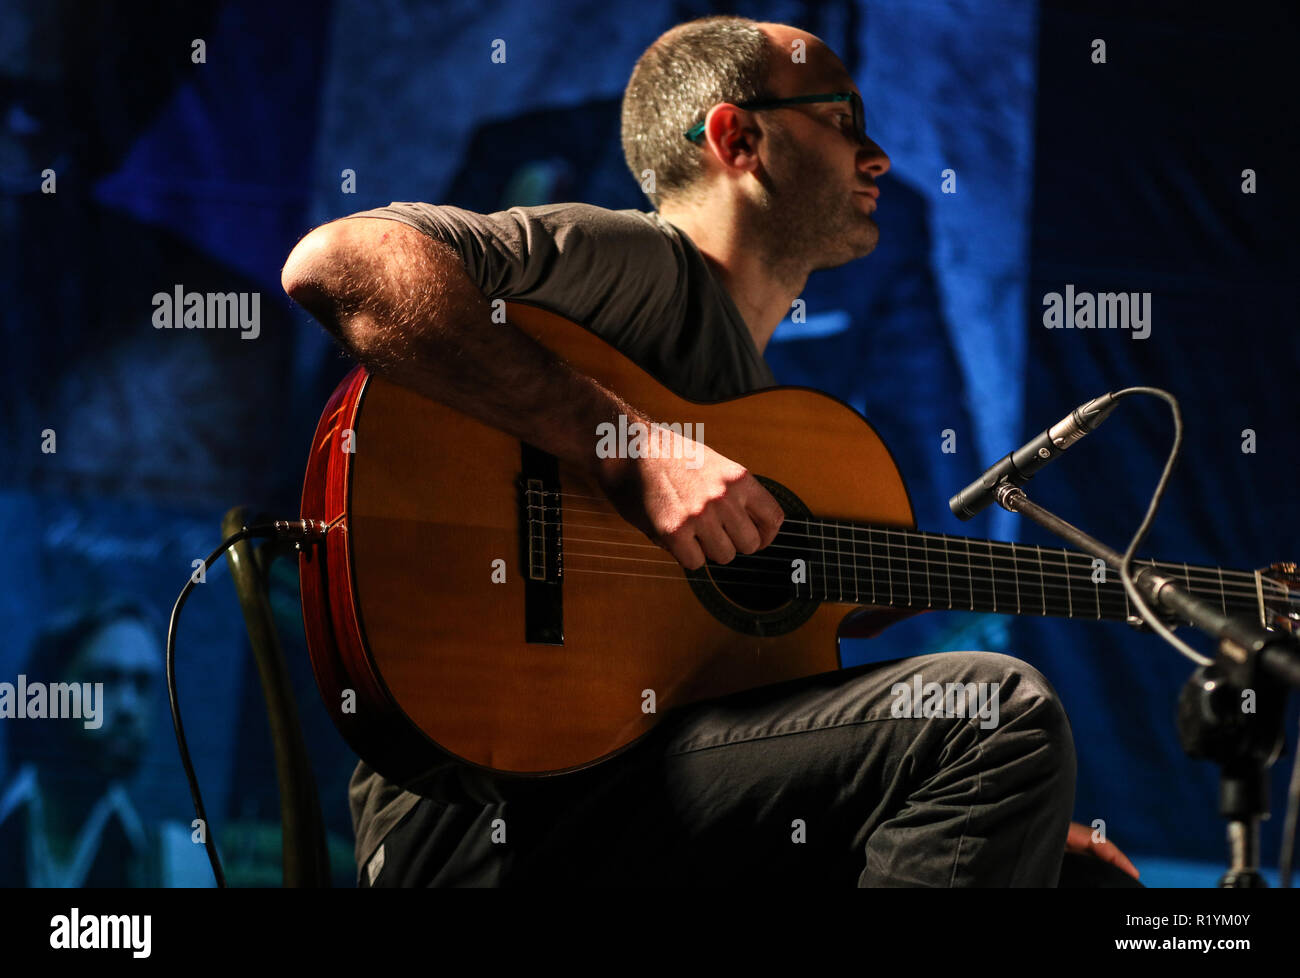 Cracow, Poland - November 2, 2018: American jazz fusion and Latin jazz guitarist Al Di Meola performing live on the Kijow.Centre stage in Krakow, Pola Stock Photo